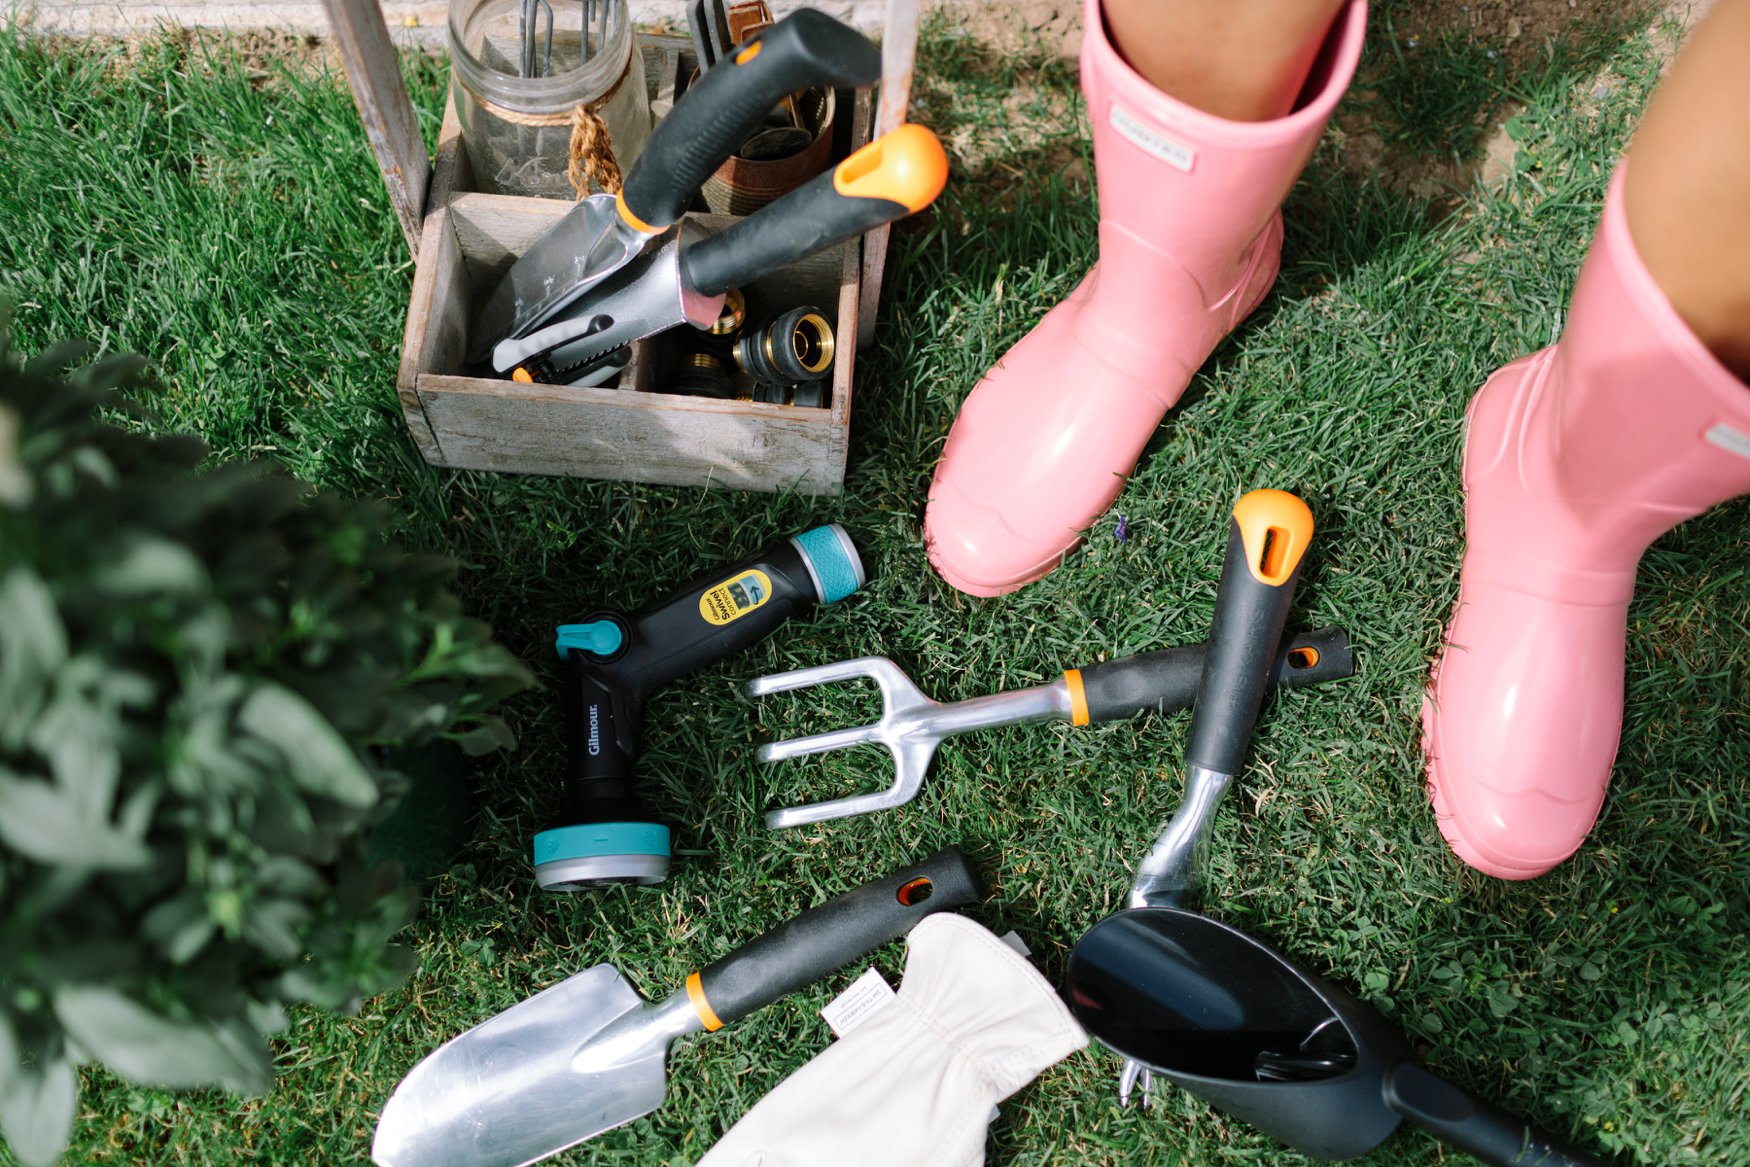 new garden tools from Fiskars and gilmour